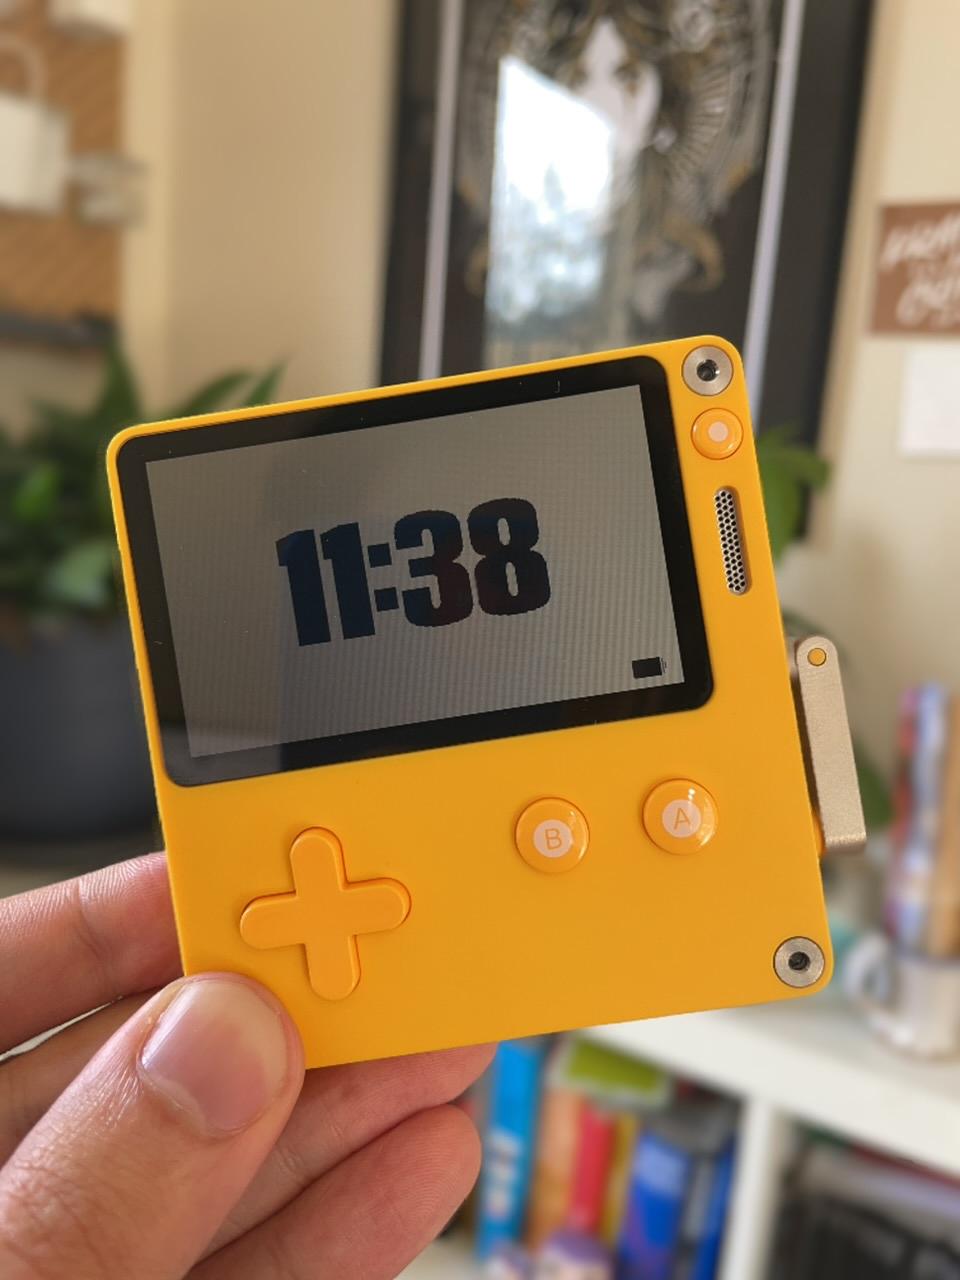 A small yellow handheld console with a crank